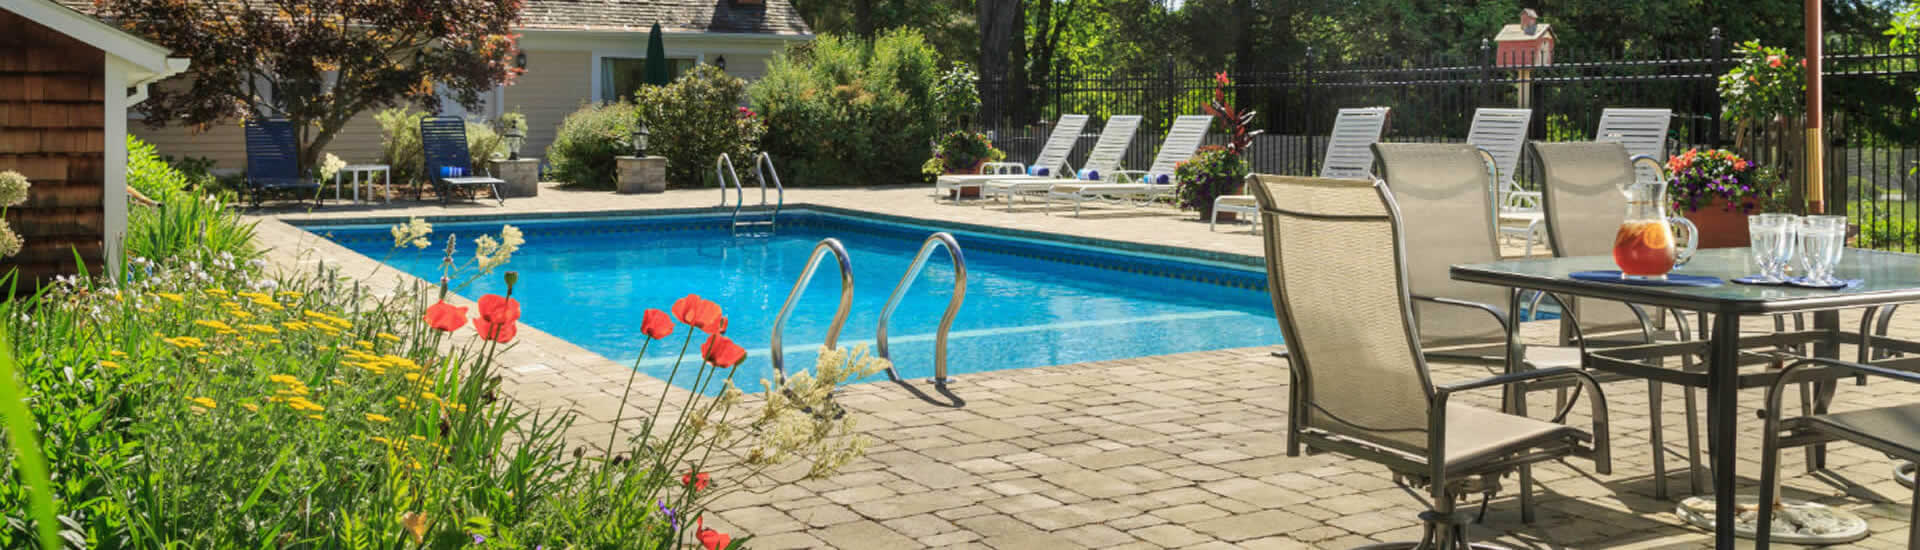 Sparkling blue swimming pool with a white brick surround, bordered by flowering plants